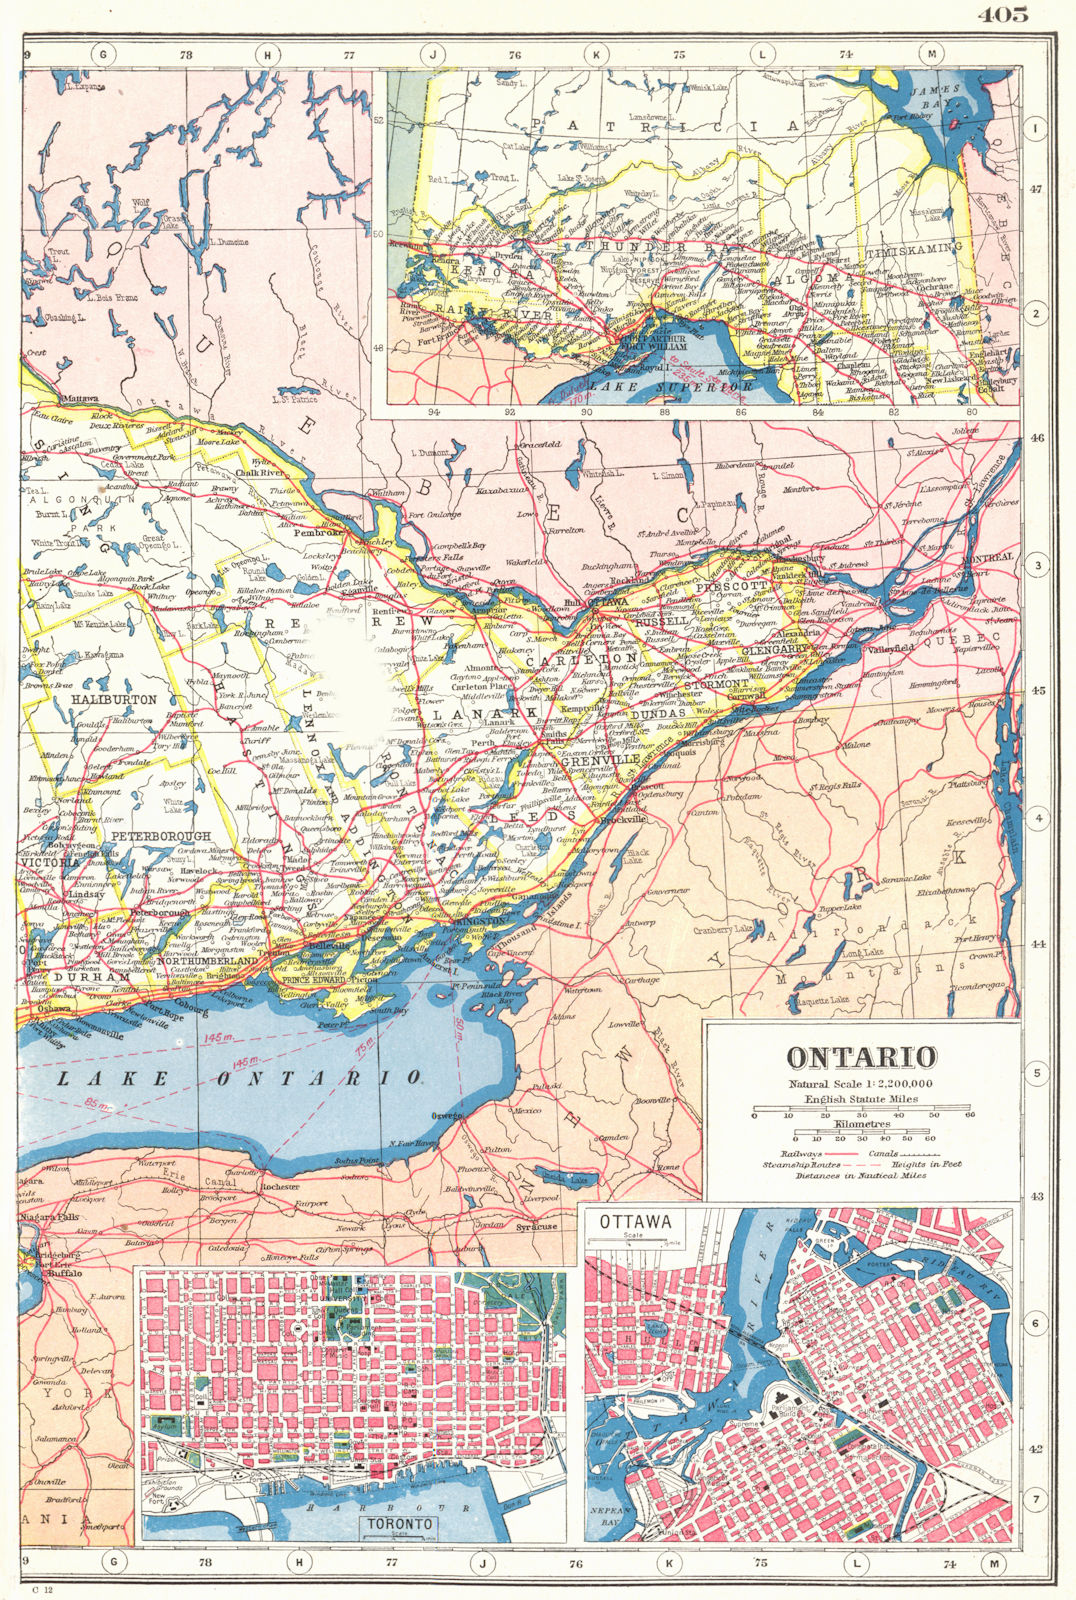 Associate Product ONTARIO EAST. Inset plans of Toronto, Ottawa. HARMSWORTH 1920 old antique map